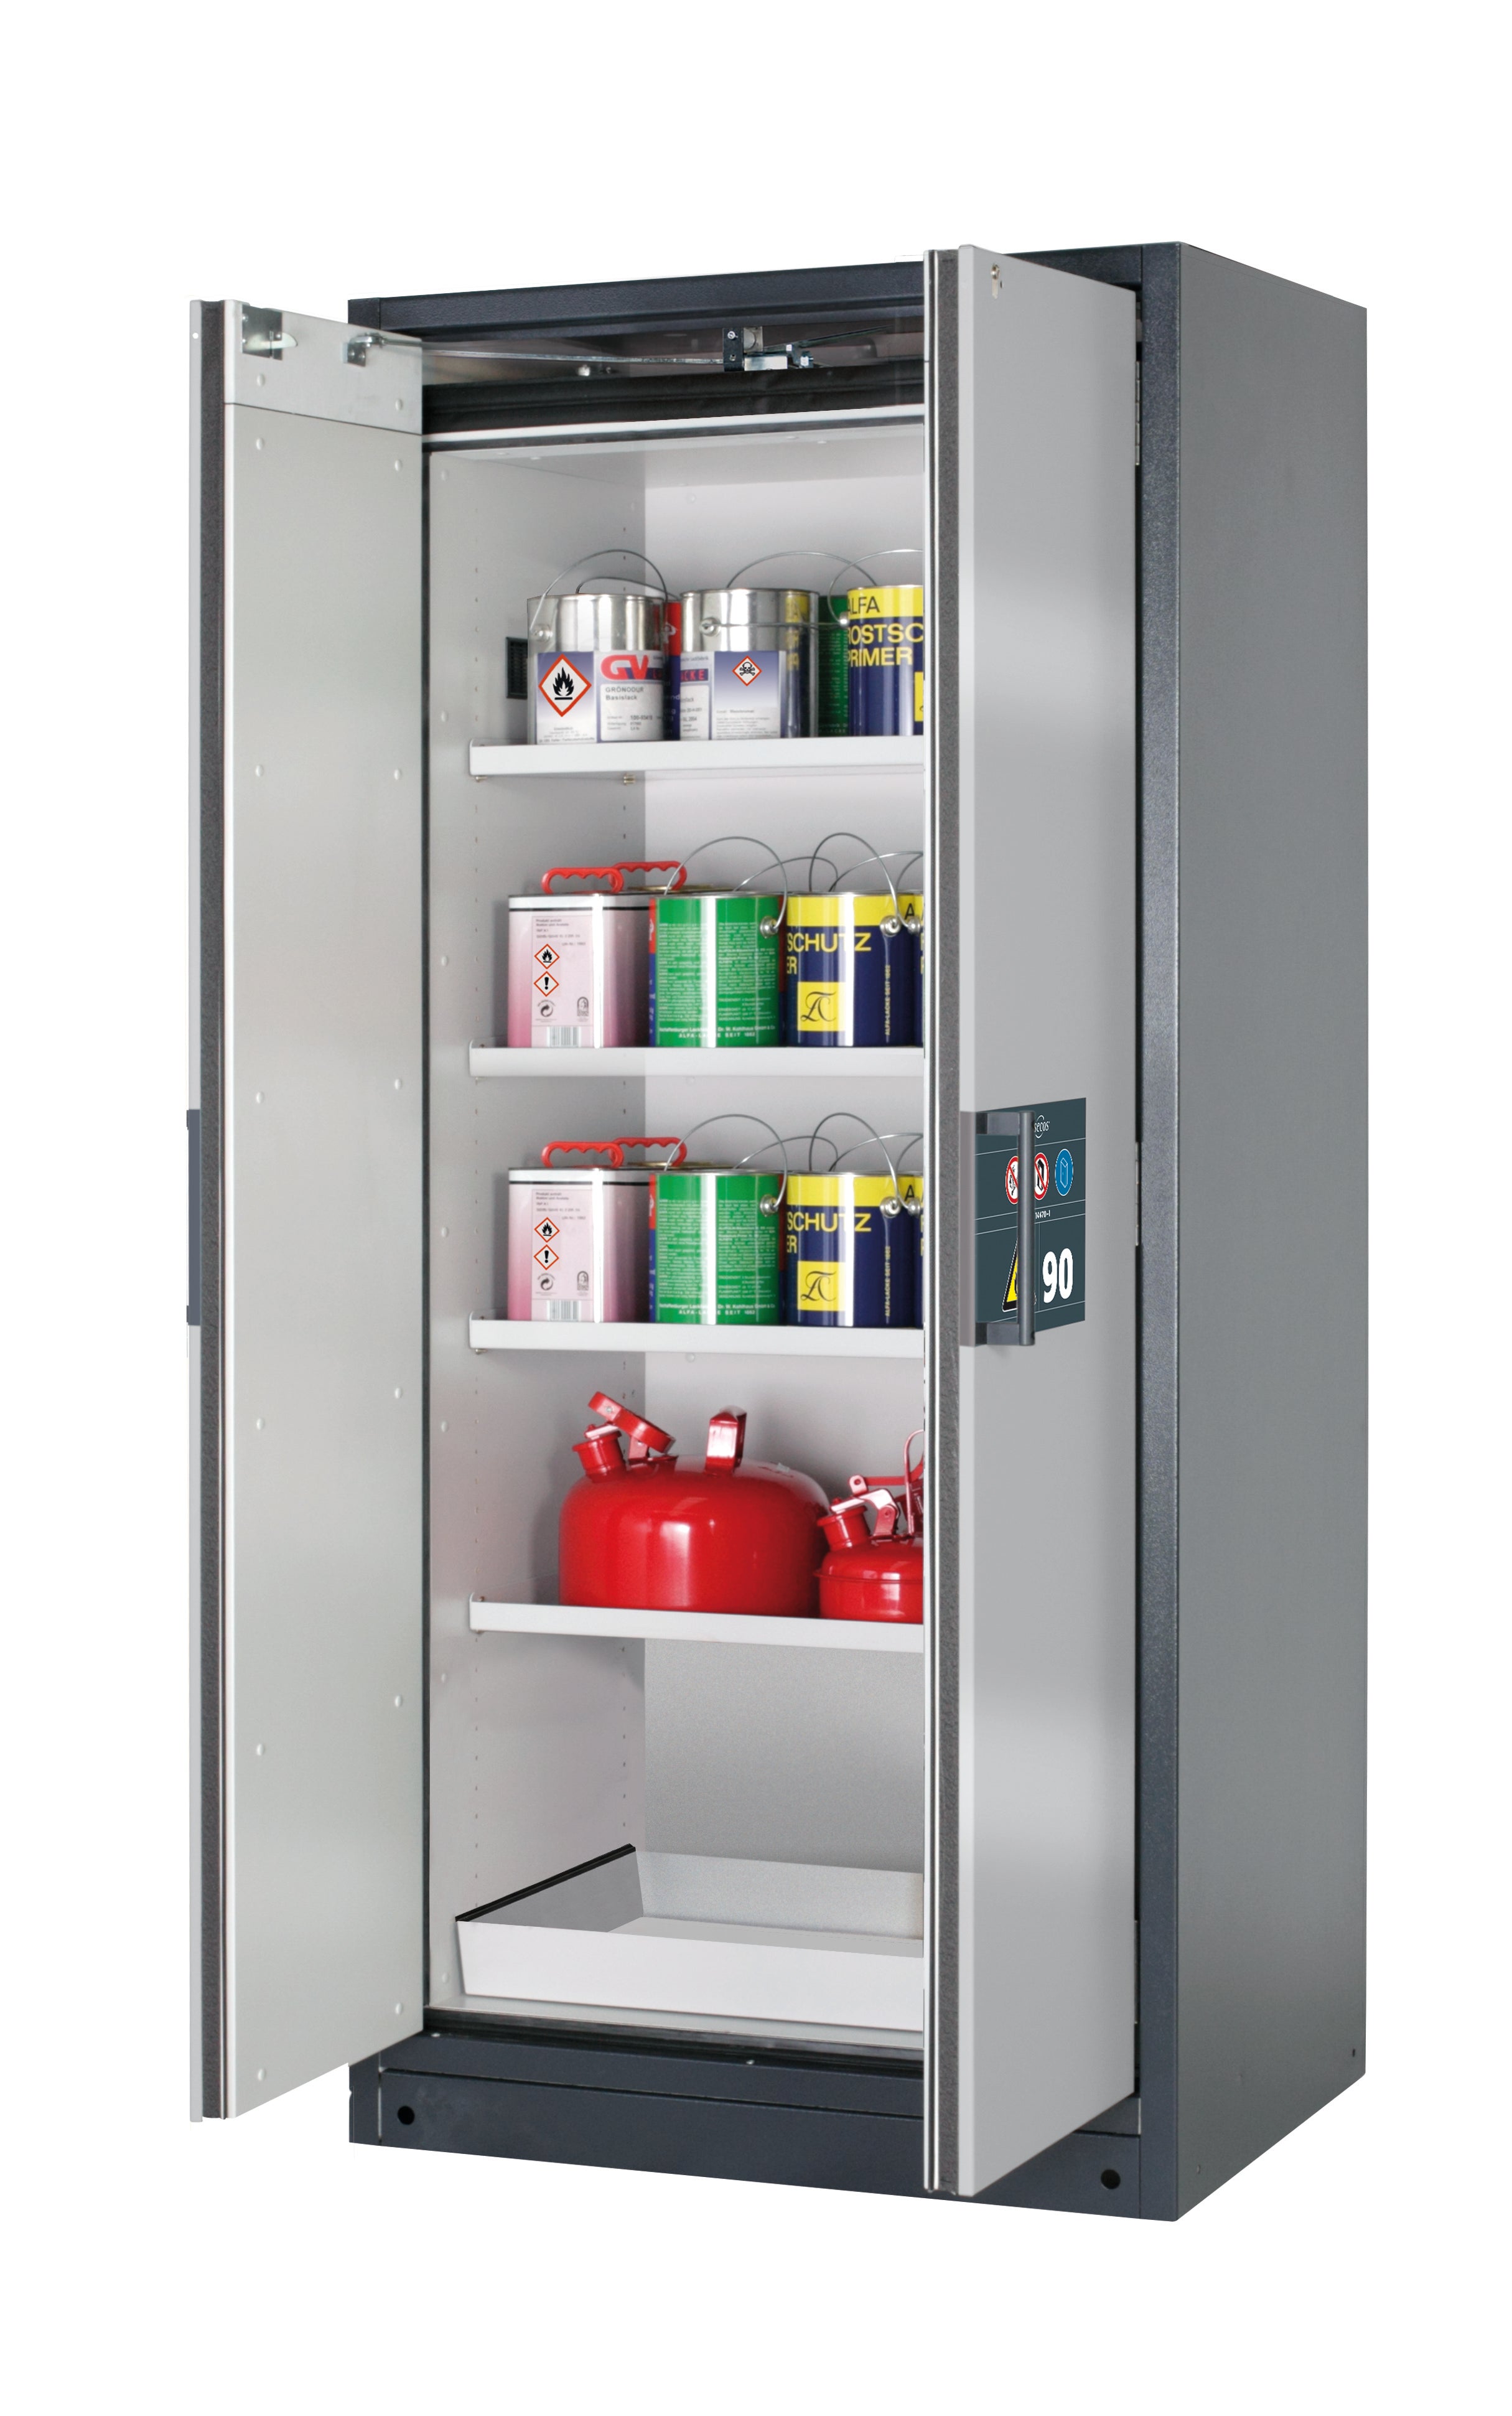 Type 90 safety storage cabinet Q-PEGASUS-90 model Q90.195.090.WDAC in asecos silver with 4x shelf standard (sheet steel),